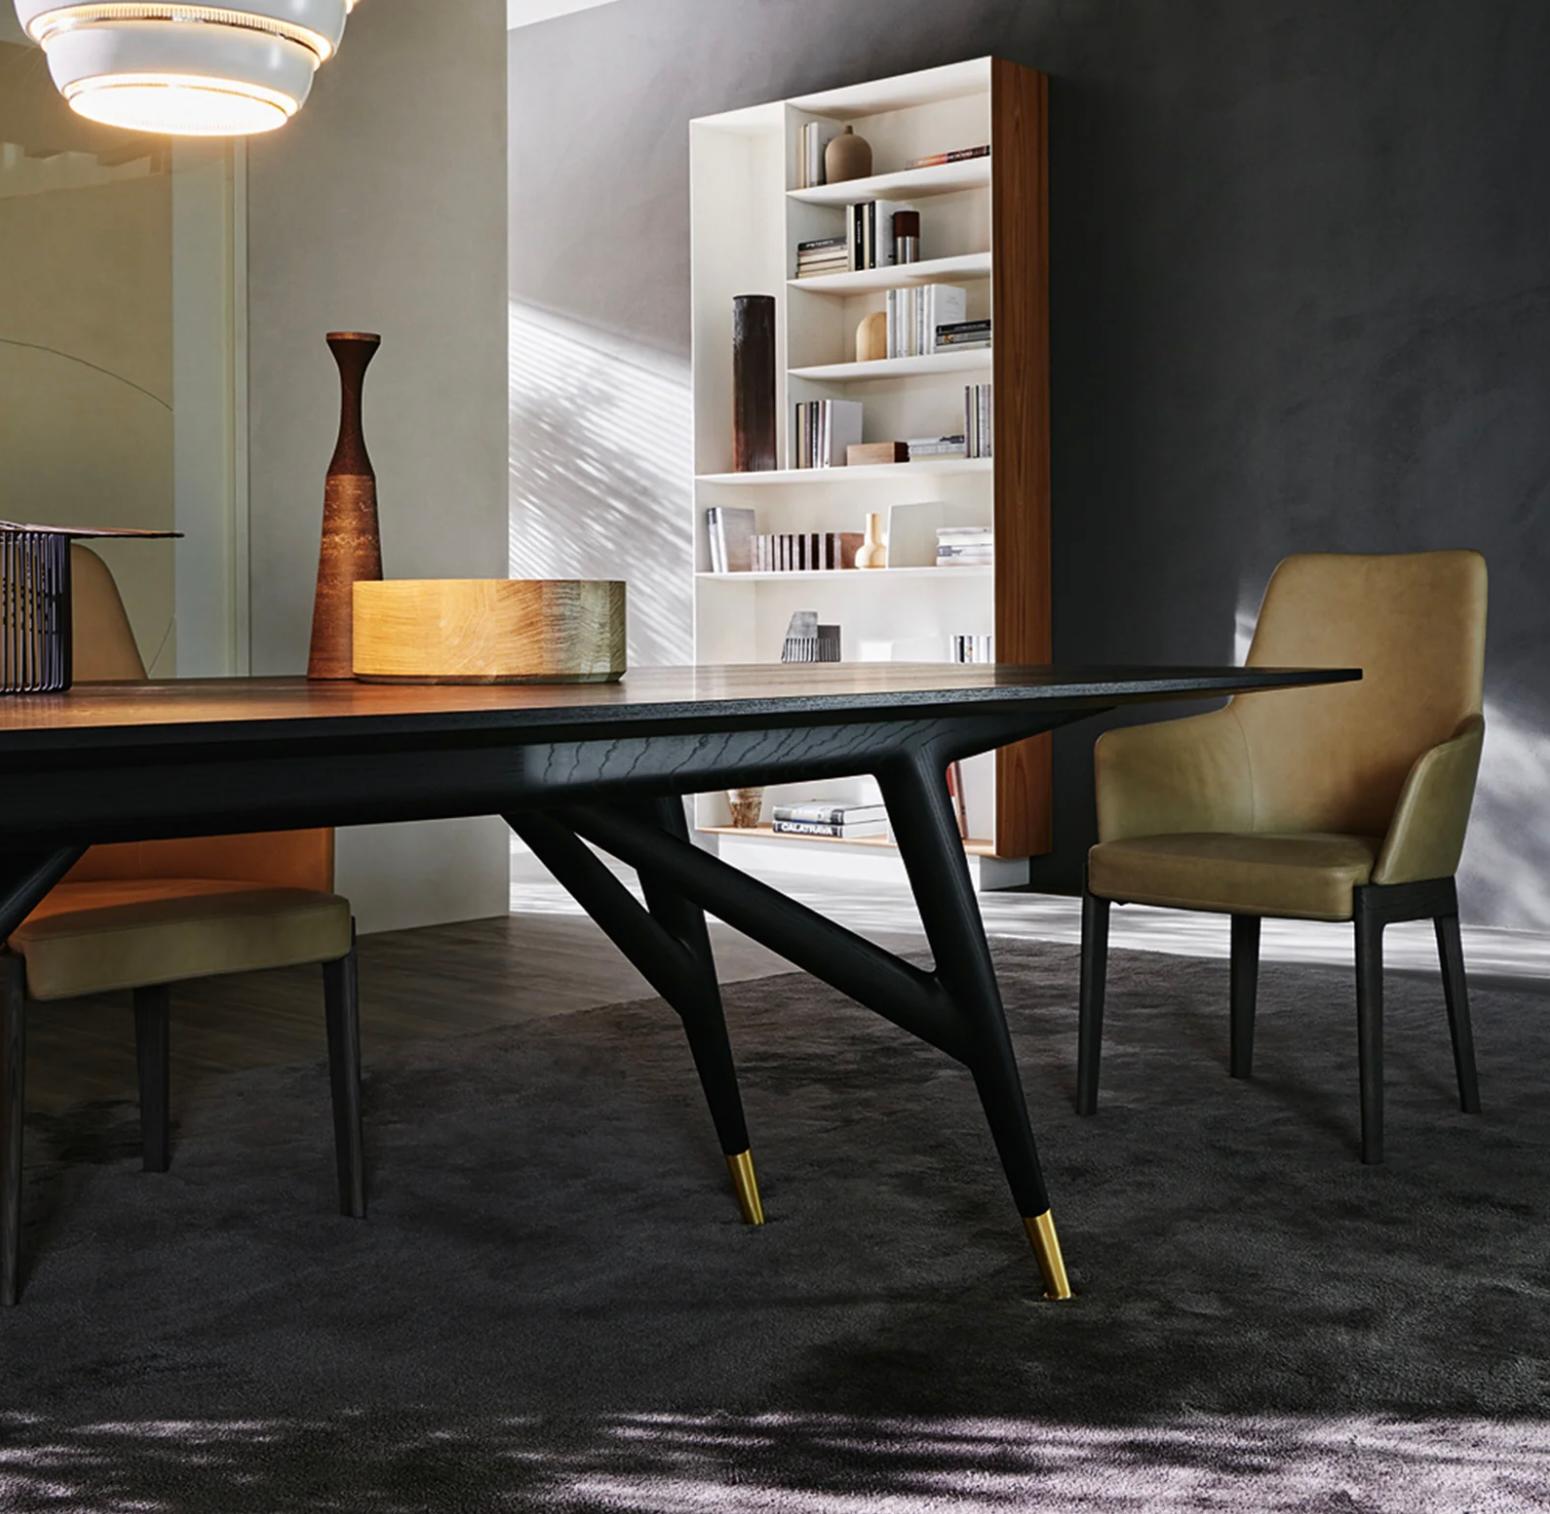 Gio Ponti's stunning conference table completely transforms the concept of meeting spaces through its simple and sleek design. An impressive 2.8 meters long, it retains a minimalist profile with two rounded edges and two flat edges. The generous